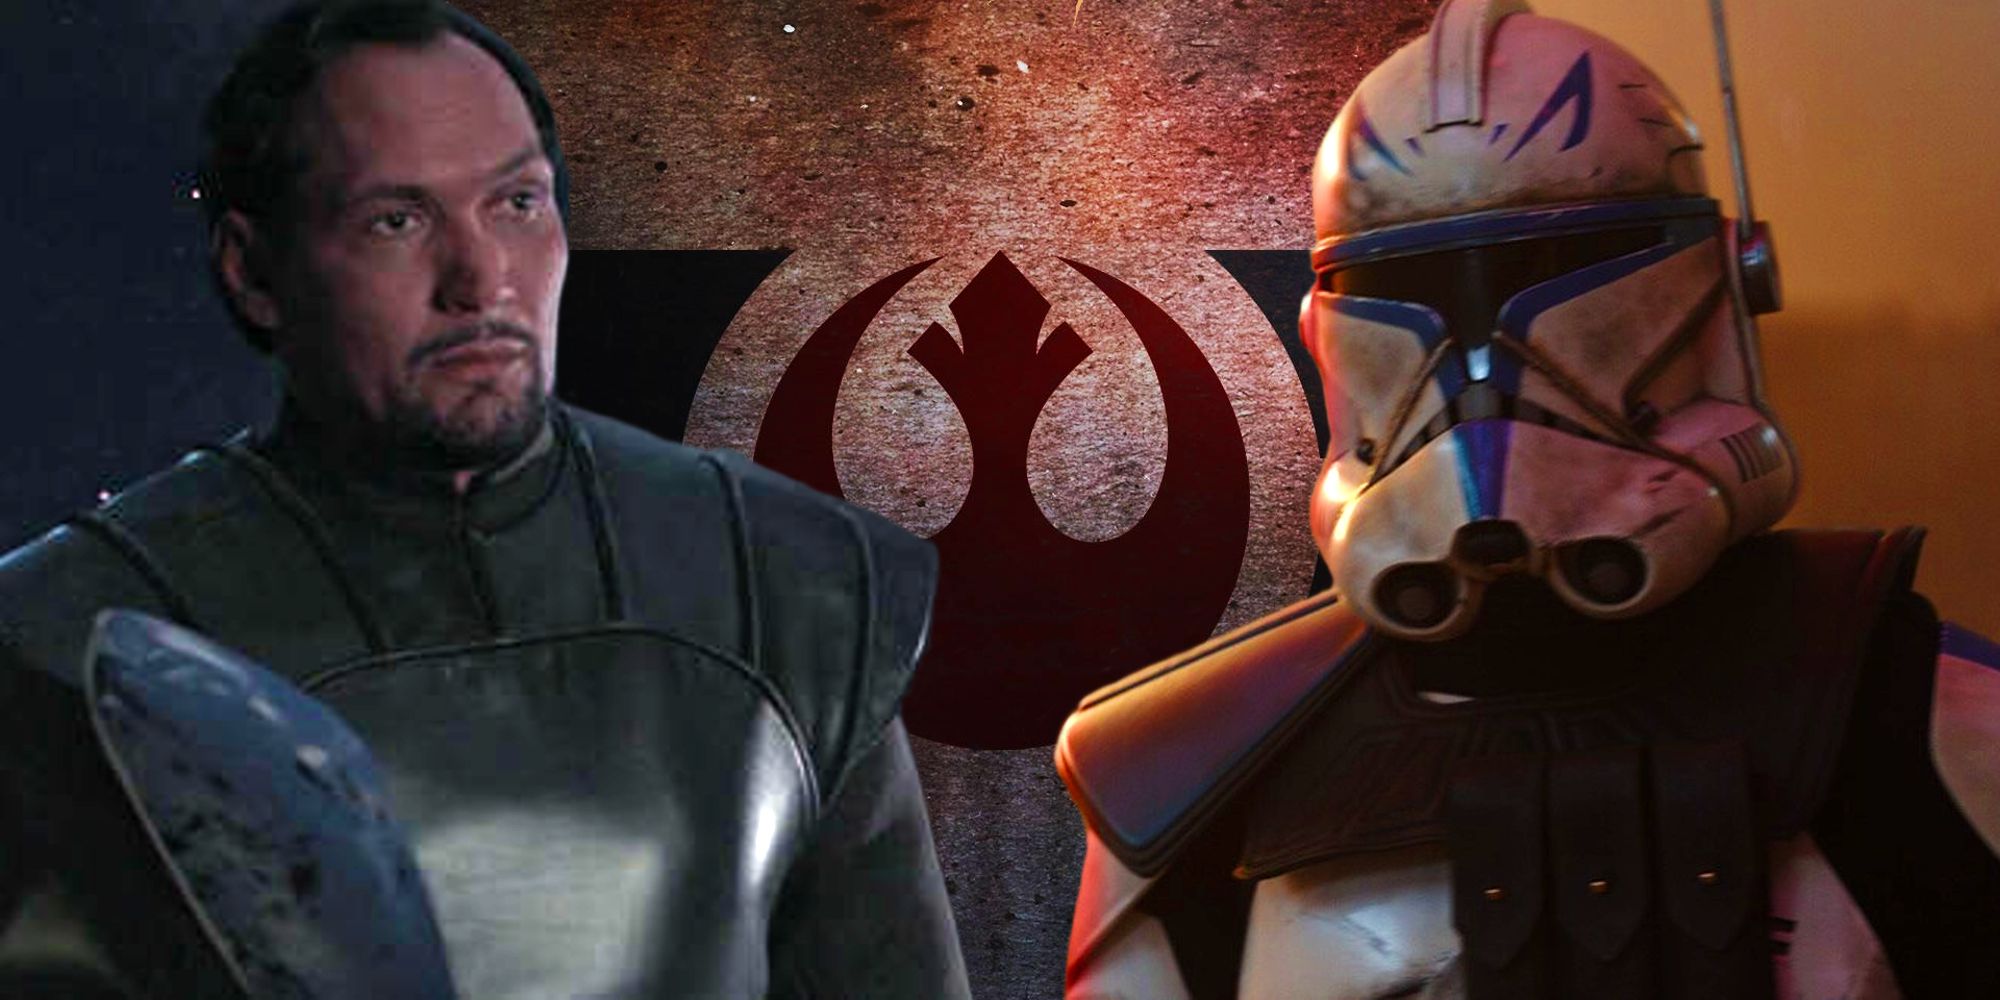 The logo of Star Wars' Rebel Alliance between images of Bail Organa from the prequels and Captain Rex from Ahsoka